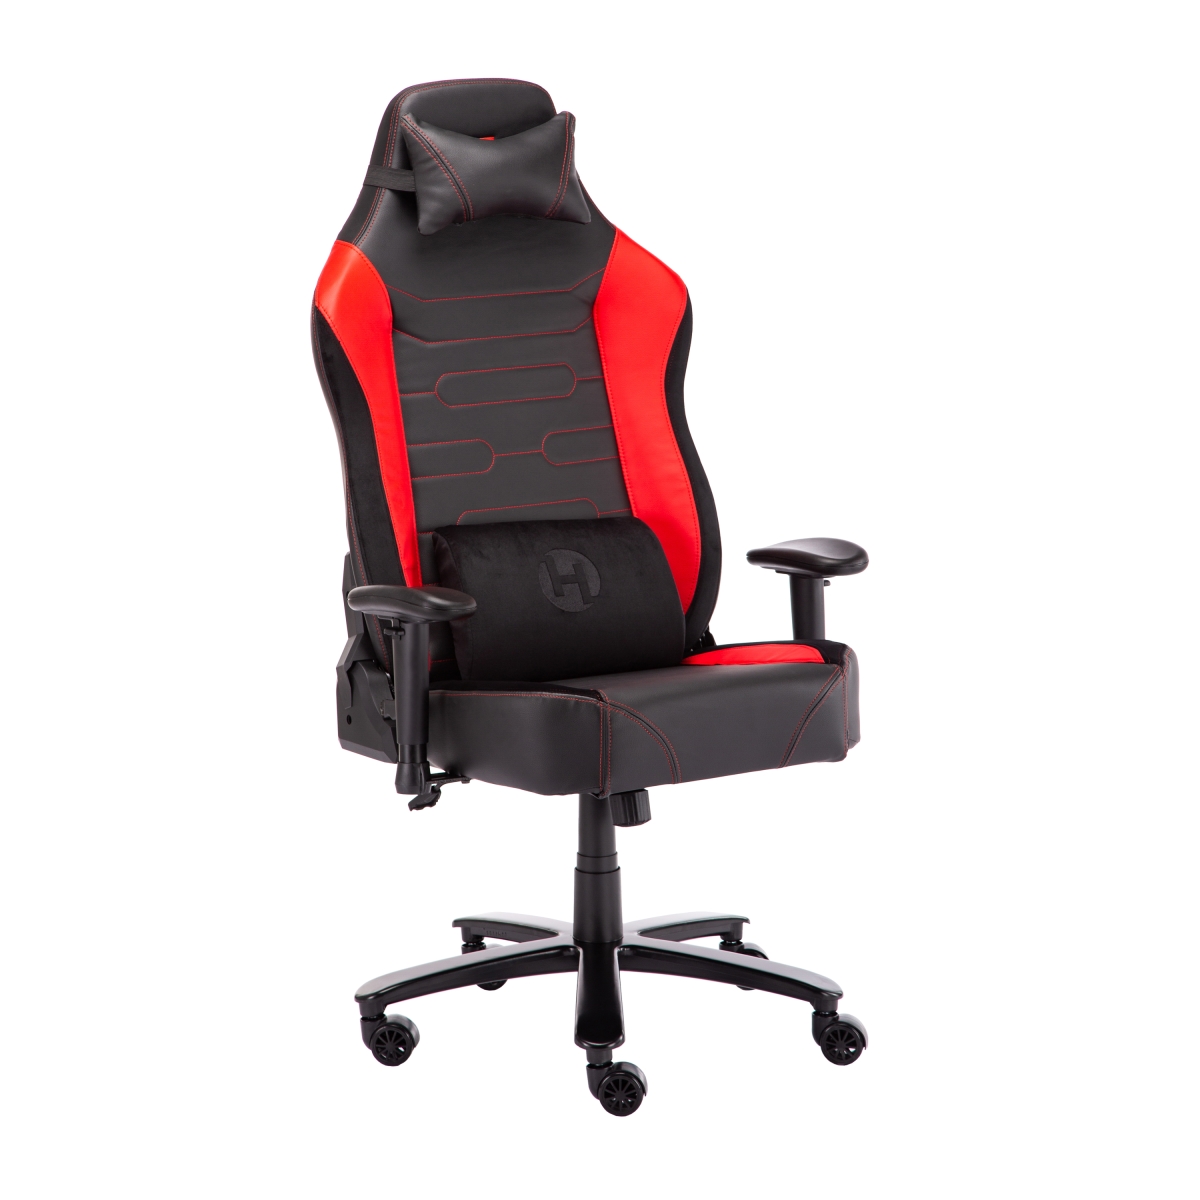 Picture of TechniSport RTA-TSXXL2-RED Office-PC Gaming Chair, Red - 2XL